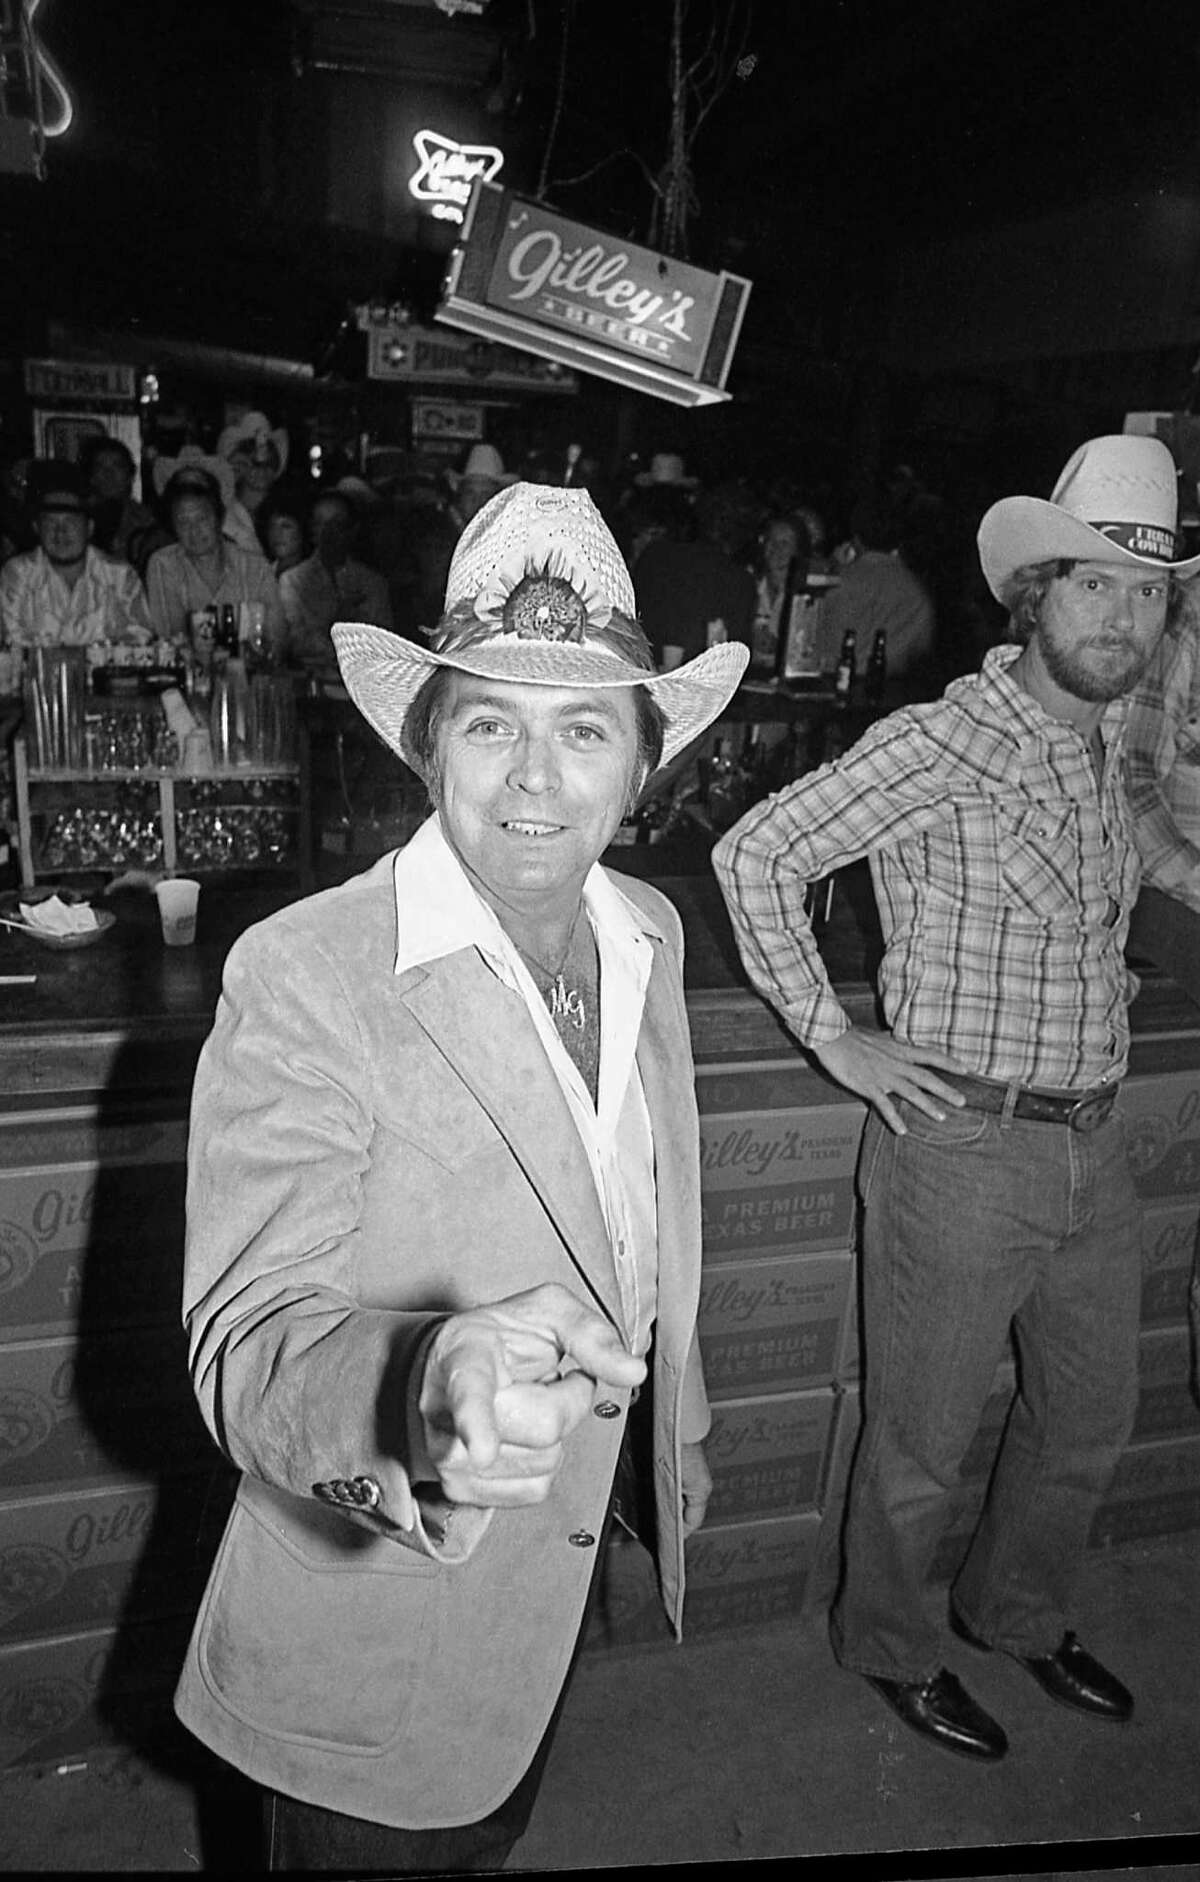 06/05/1980 - Mickey Gilley at Houston movie premiere party for "Urban Cowboy" at Gilley's club.